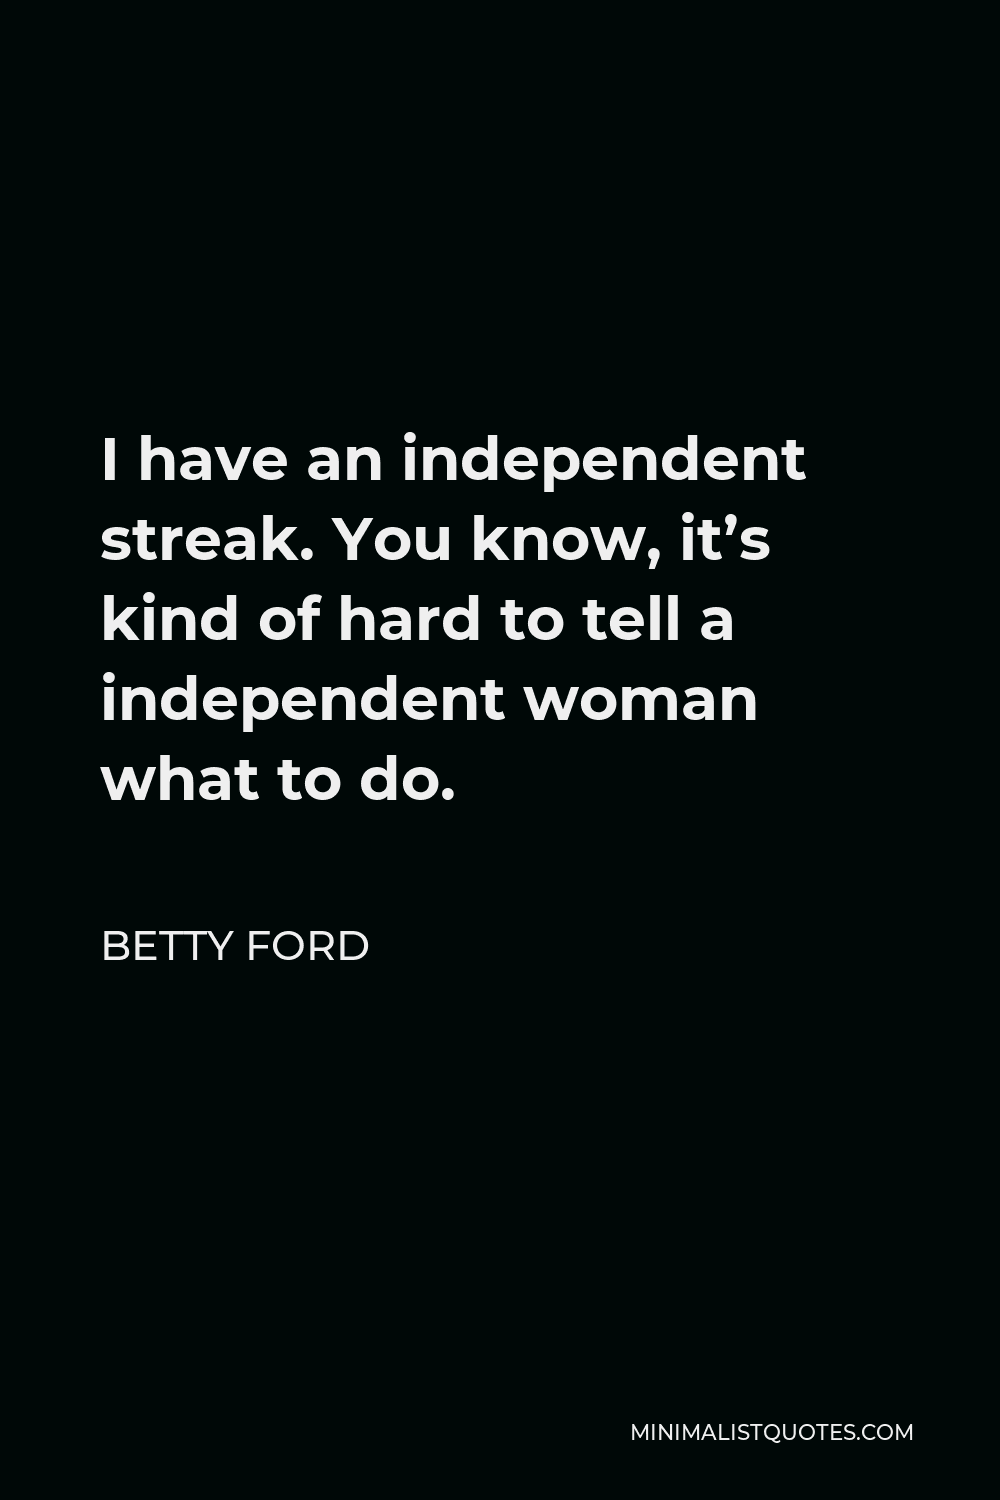 Betty Ford Quote - I have an independent streak. You know, it’s kind of hard to tell a independent woman what to do.